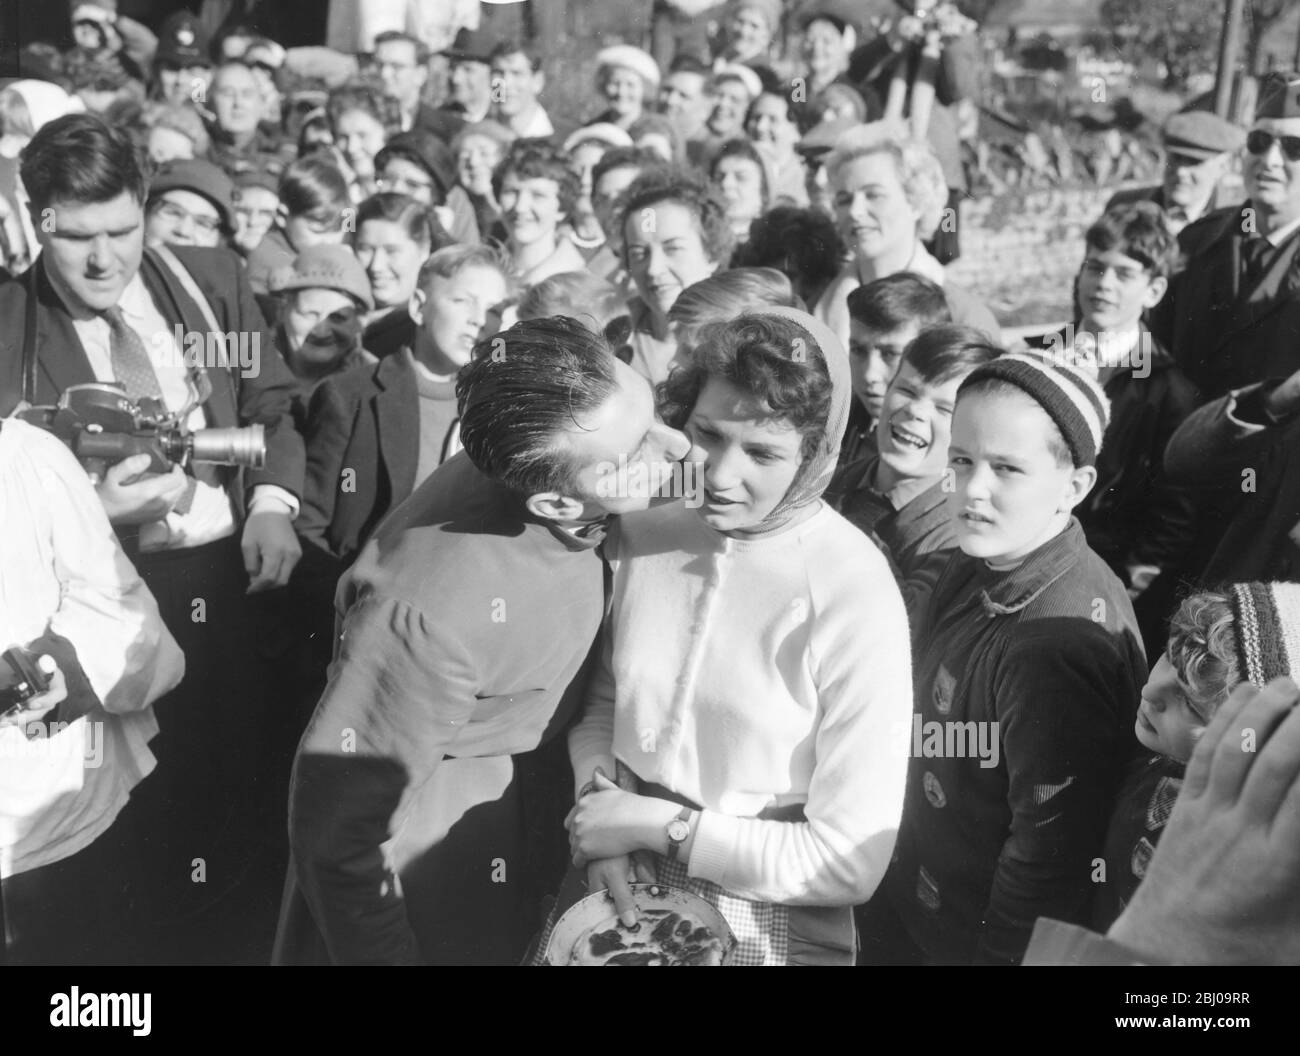 14 FEBRUARY 1961 - CAROL VORLEY - 19 YEAR OLD WINNER OF THE OLNEY PANCAKE RACE RECEIVES A KISS AT THE FINISHING LINE AFTER COMPLETING THE 415 YARD COURSE IN 1 MINUTE AND 14 SECONDS. THE RACE DATES BACK TO 1445 AND WAS REVIVED BY THE LOCAL VICAR IN 1946. - OLNEY, BUCKINGHAMSHIRE, ENGLAND - Stock Photo